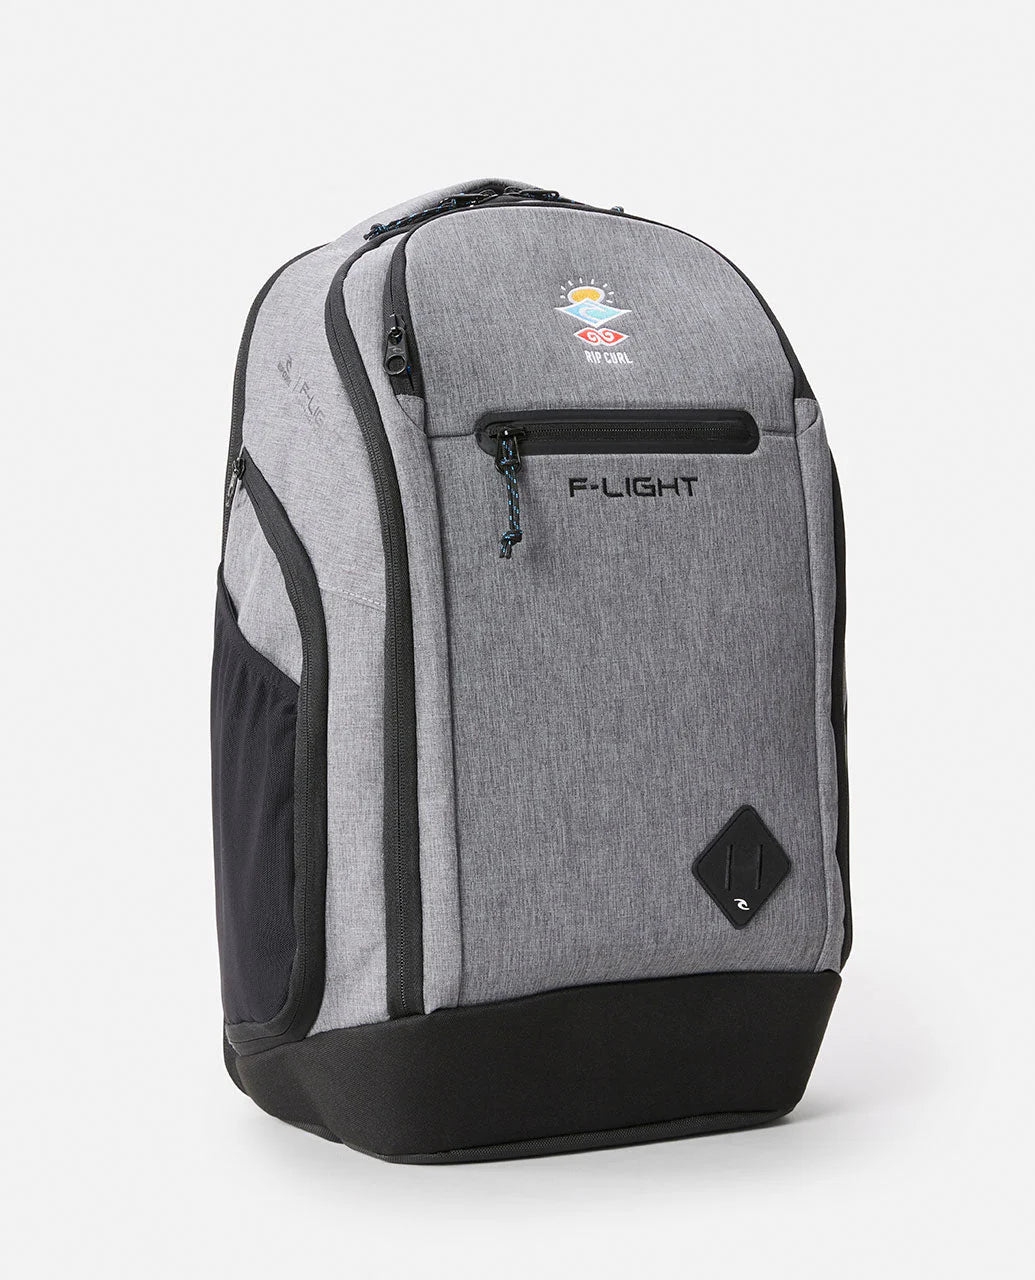 RC F-Light Searcher 45L IOS Backpack - Grey Marle